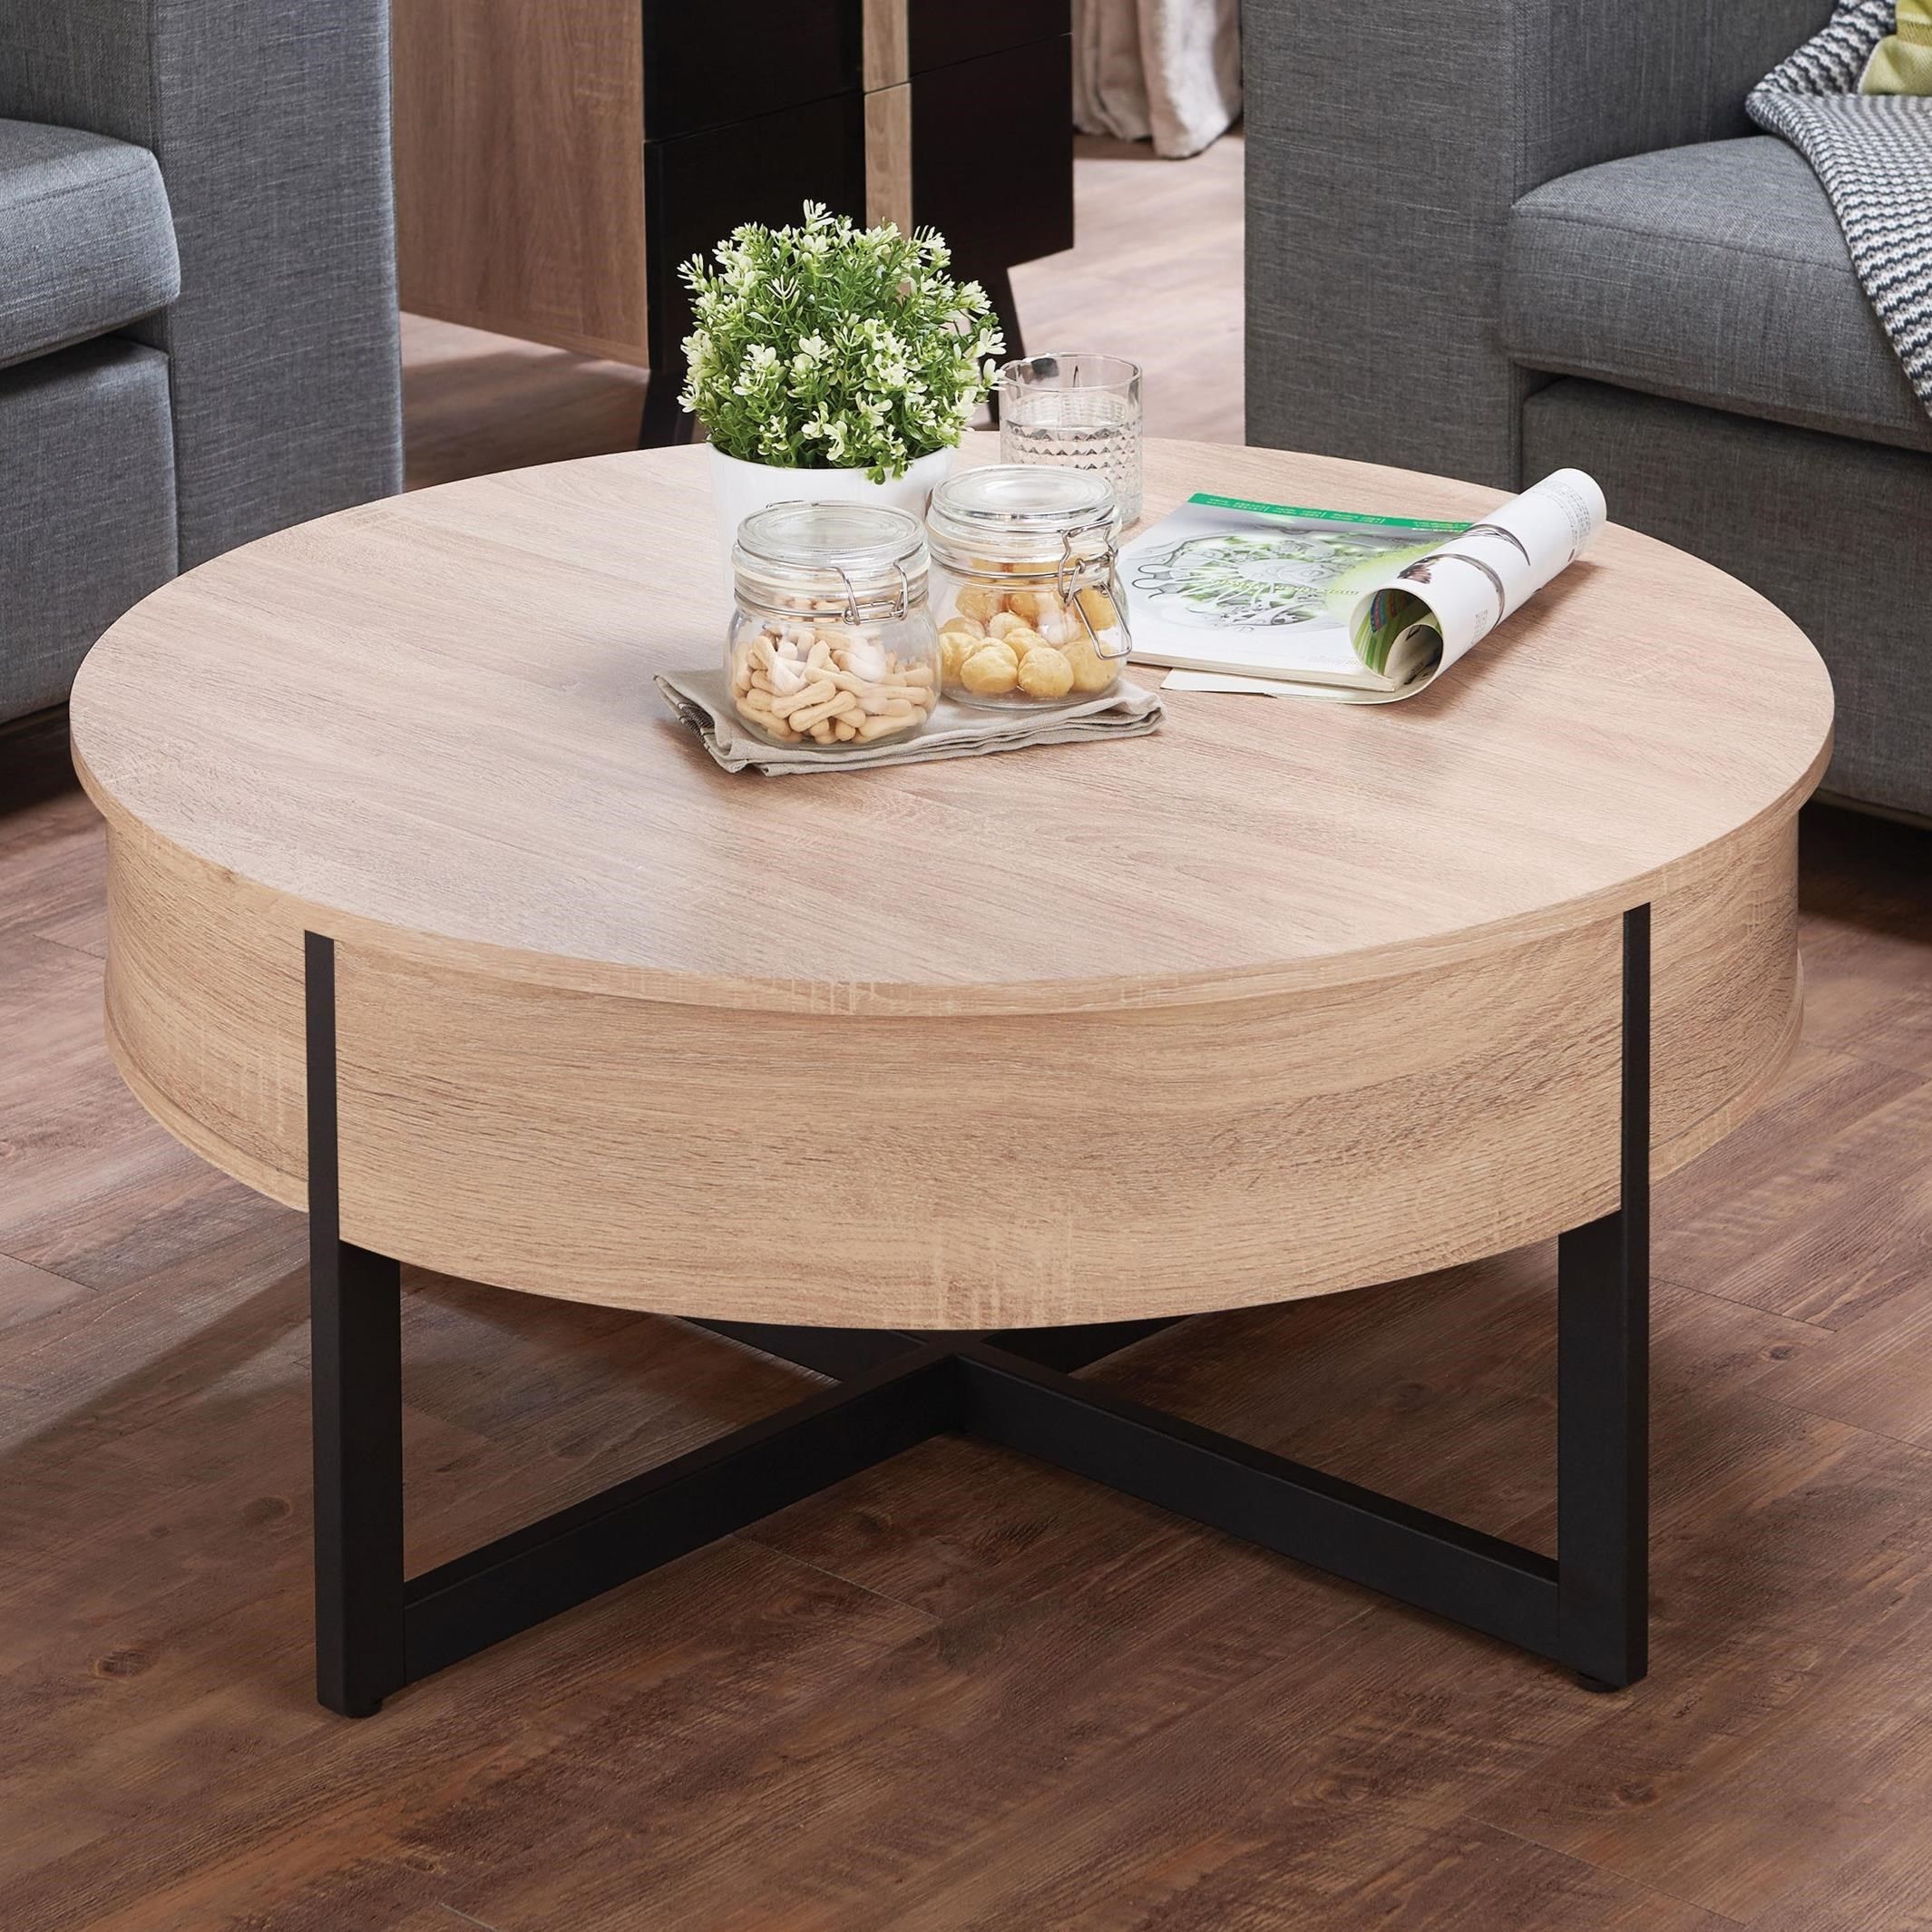 Corner Coffee Table With Storage – Amalina In Round Coffee Tables With Storage (View 13 of 20)